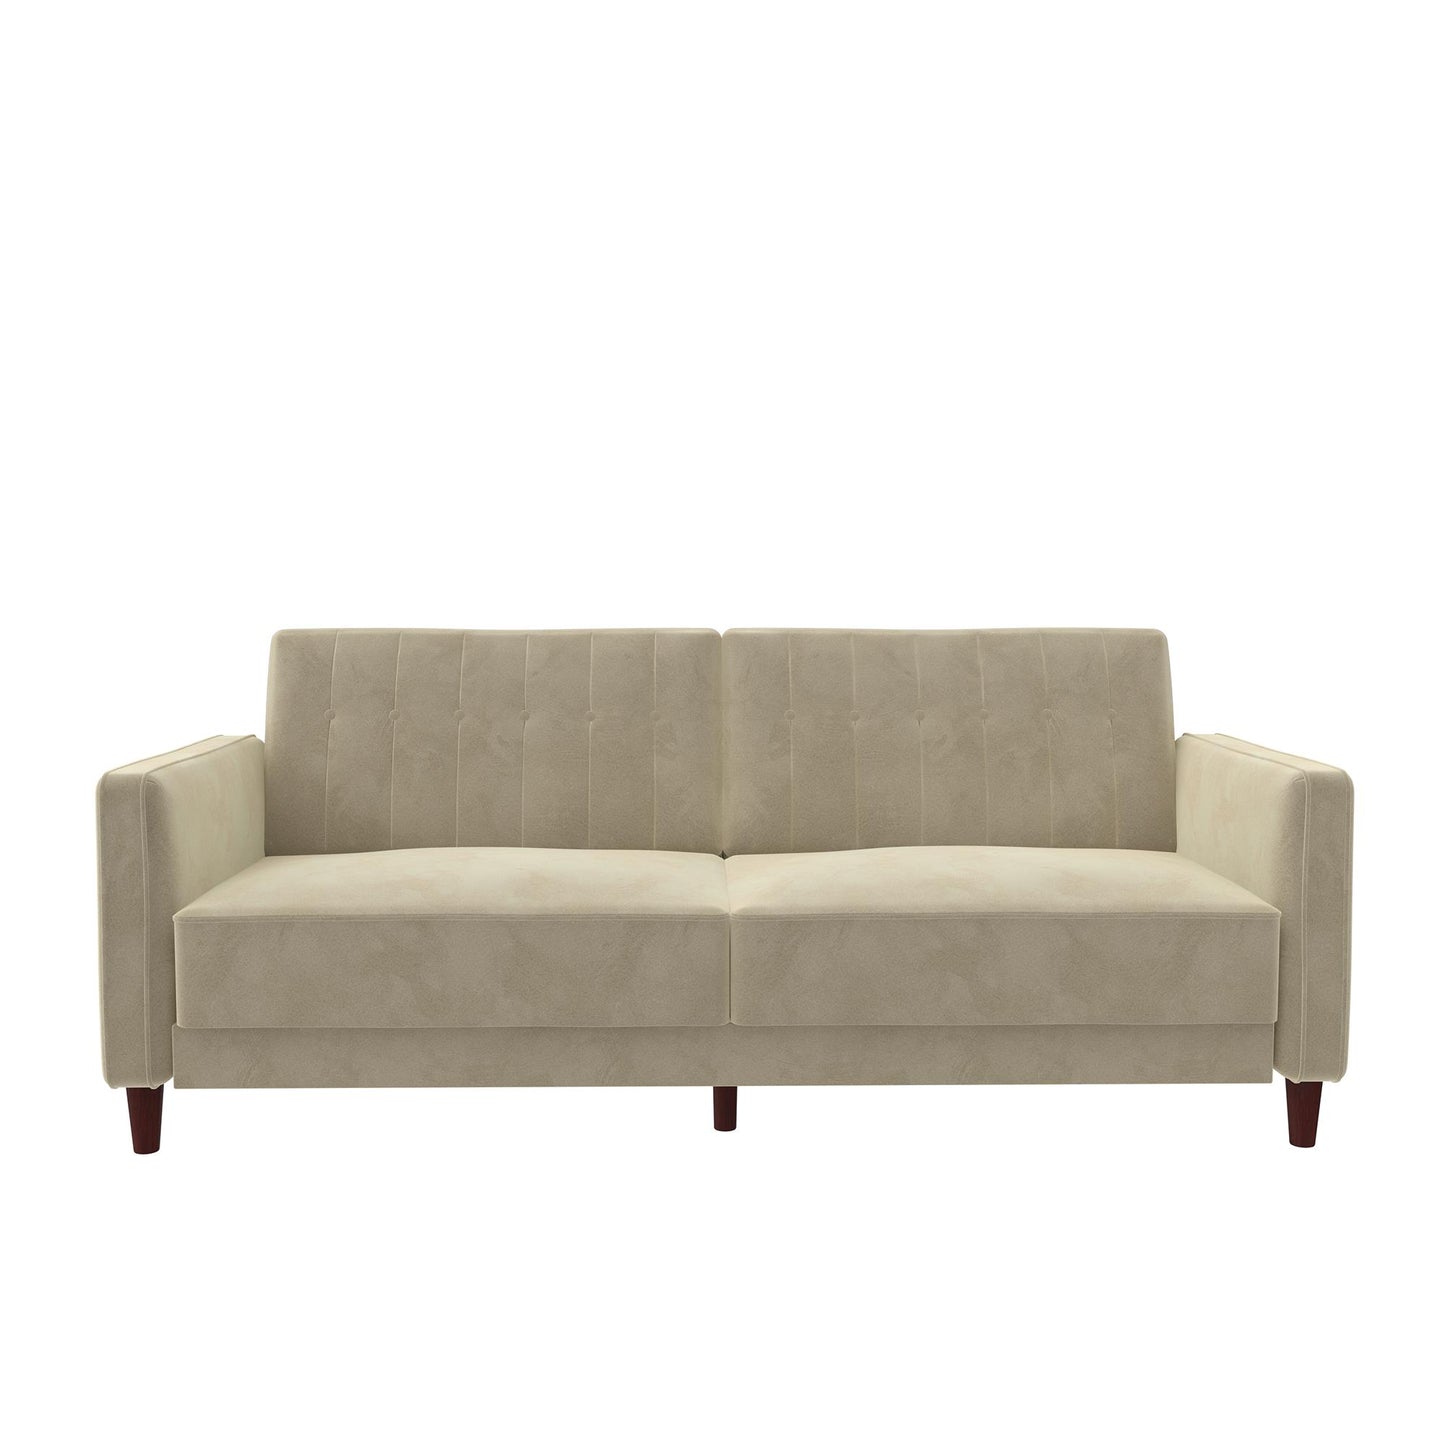 Pin Tufted Transitional Futon with Vertical Stitching and Button Tufting - Tan Velvet